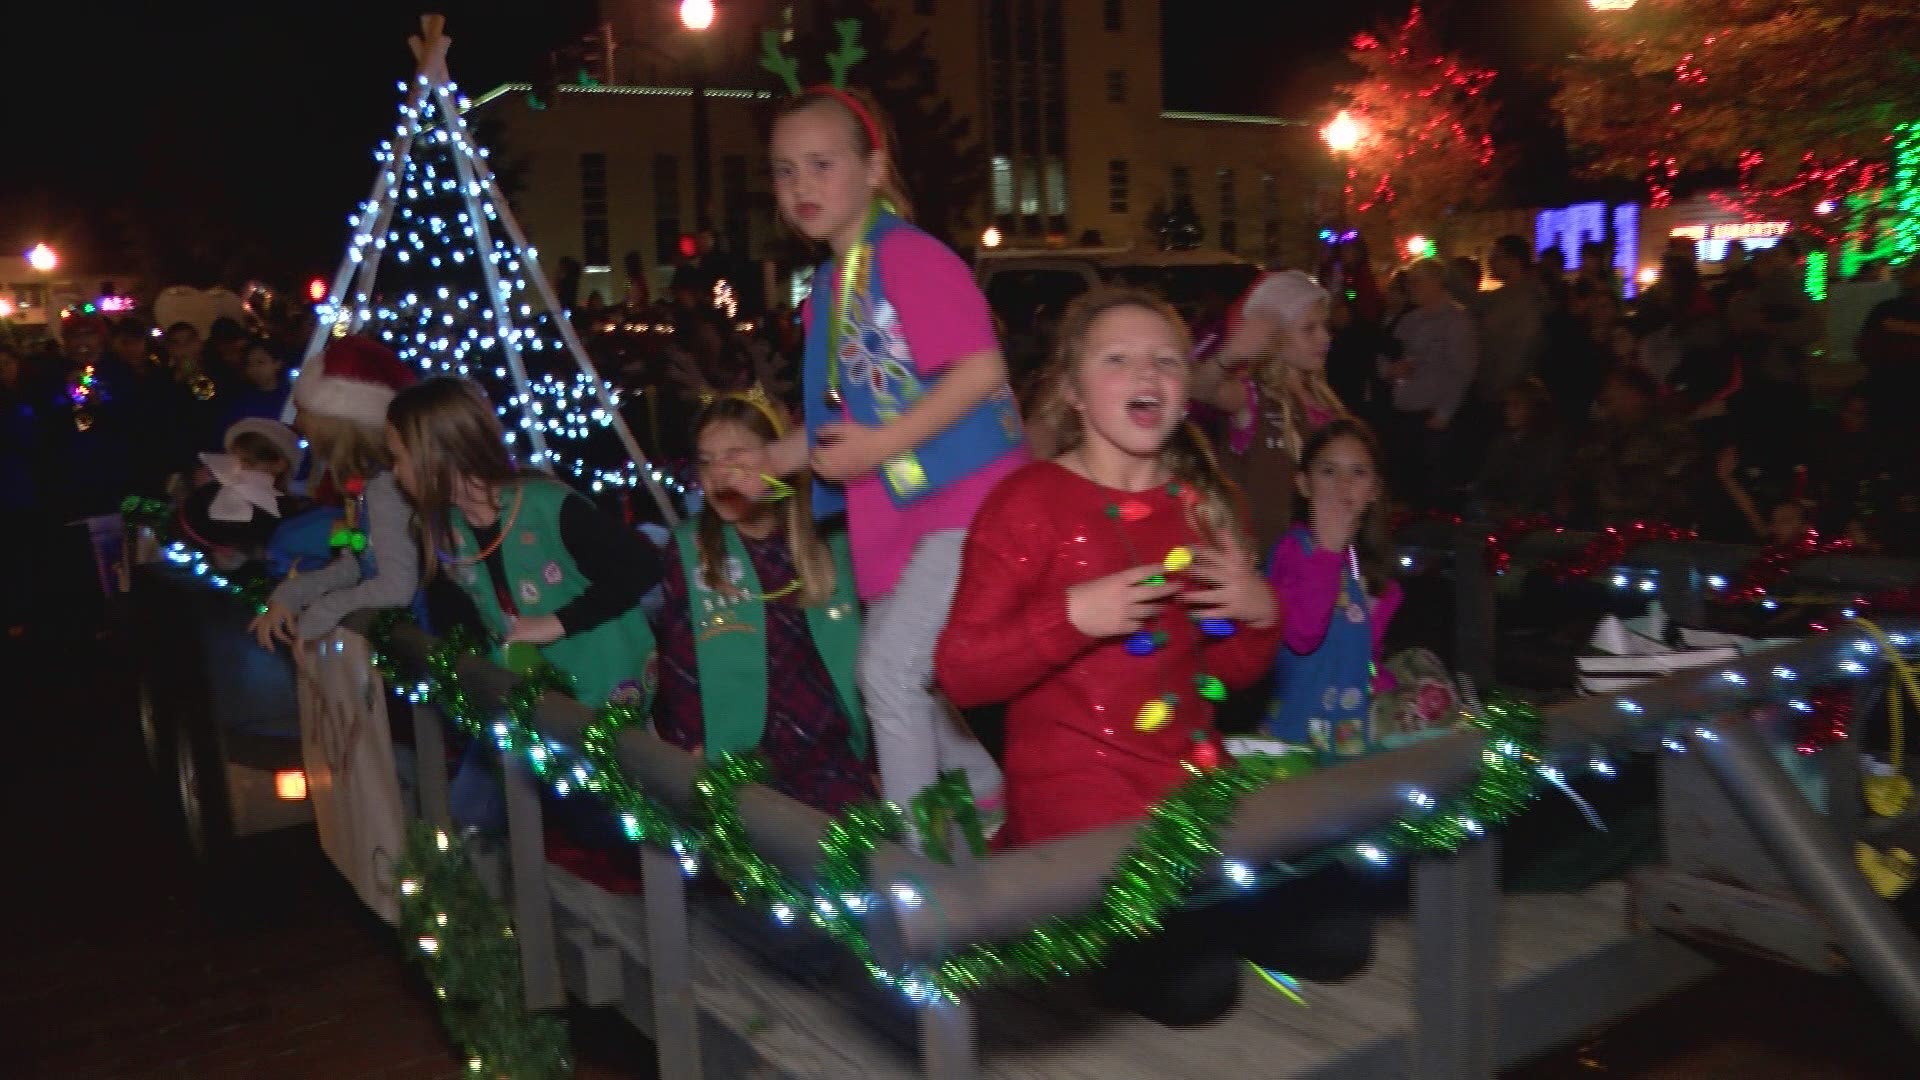 See the sights, sounds, and people at the 2018 Tyler, Texas Christmas Parade.